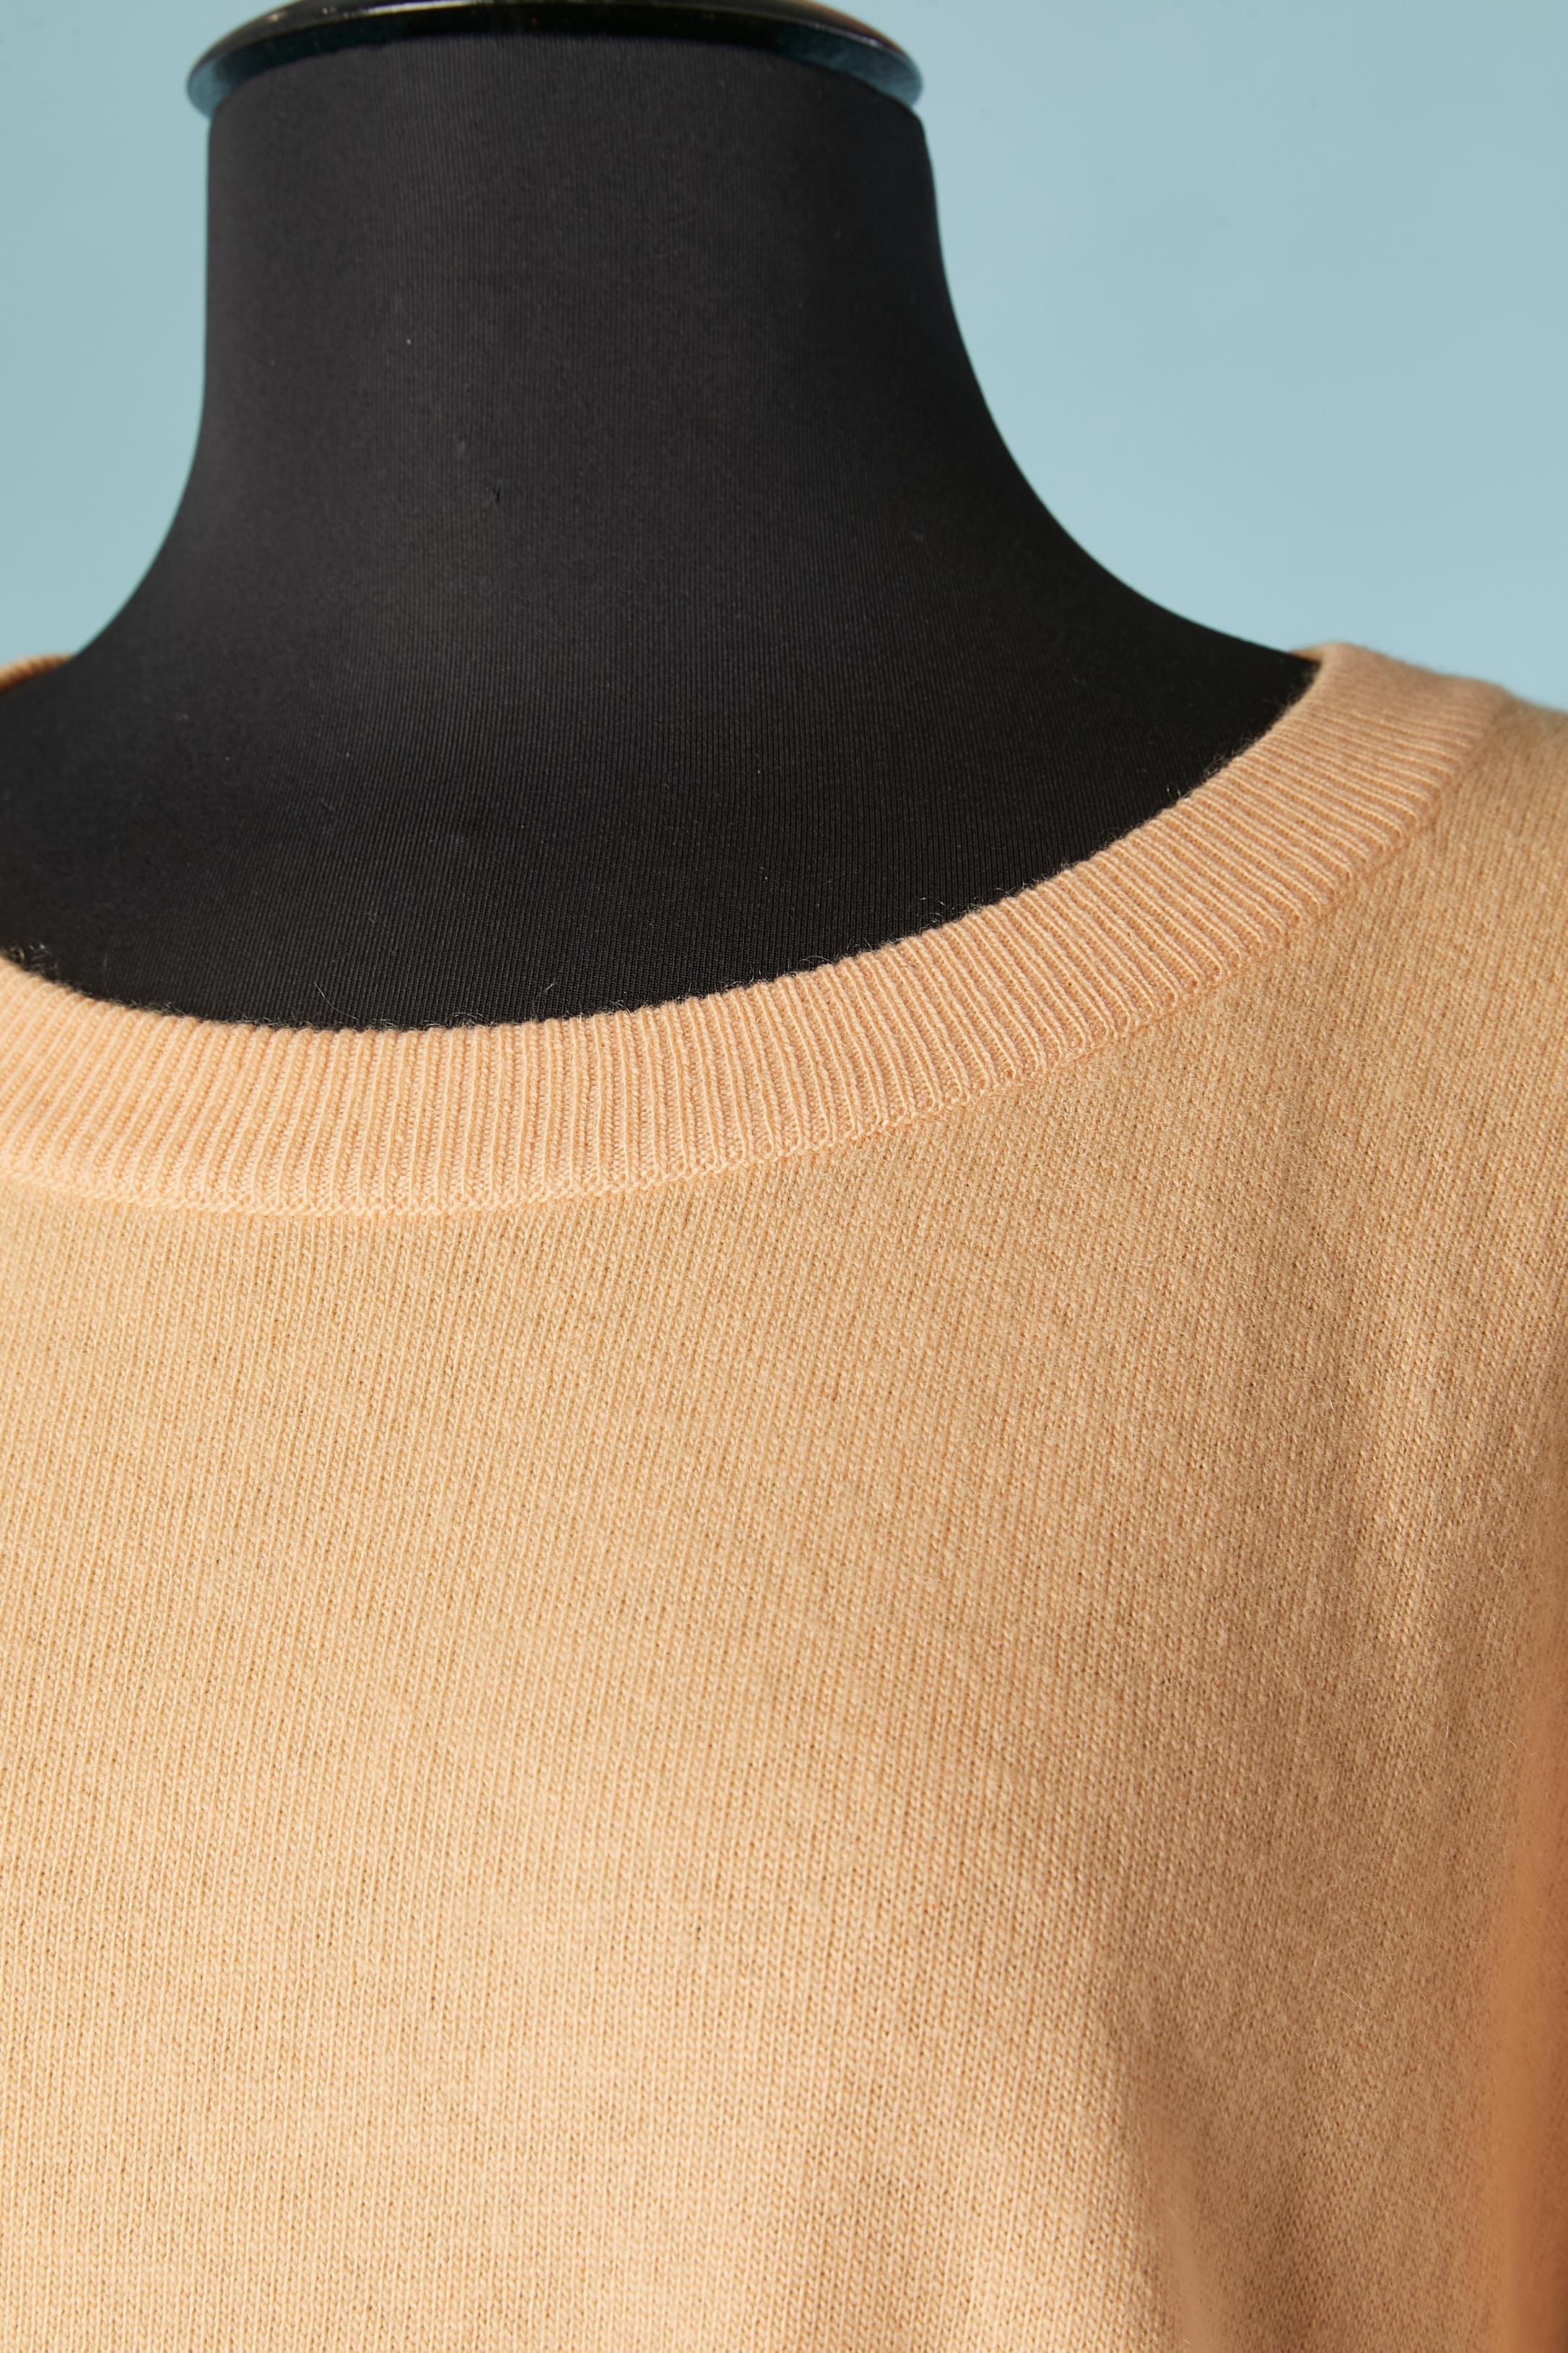 Orange Salmon pink cashmere sweater with short sleeves CHANEL Boutique  For Sale